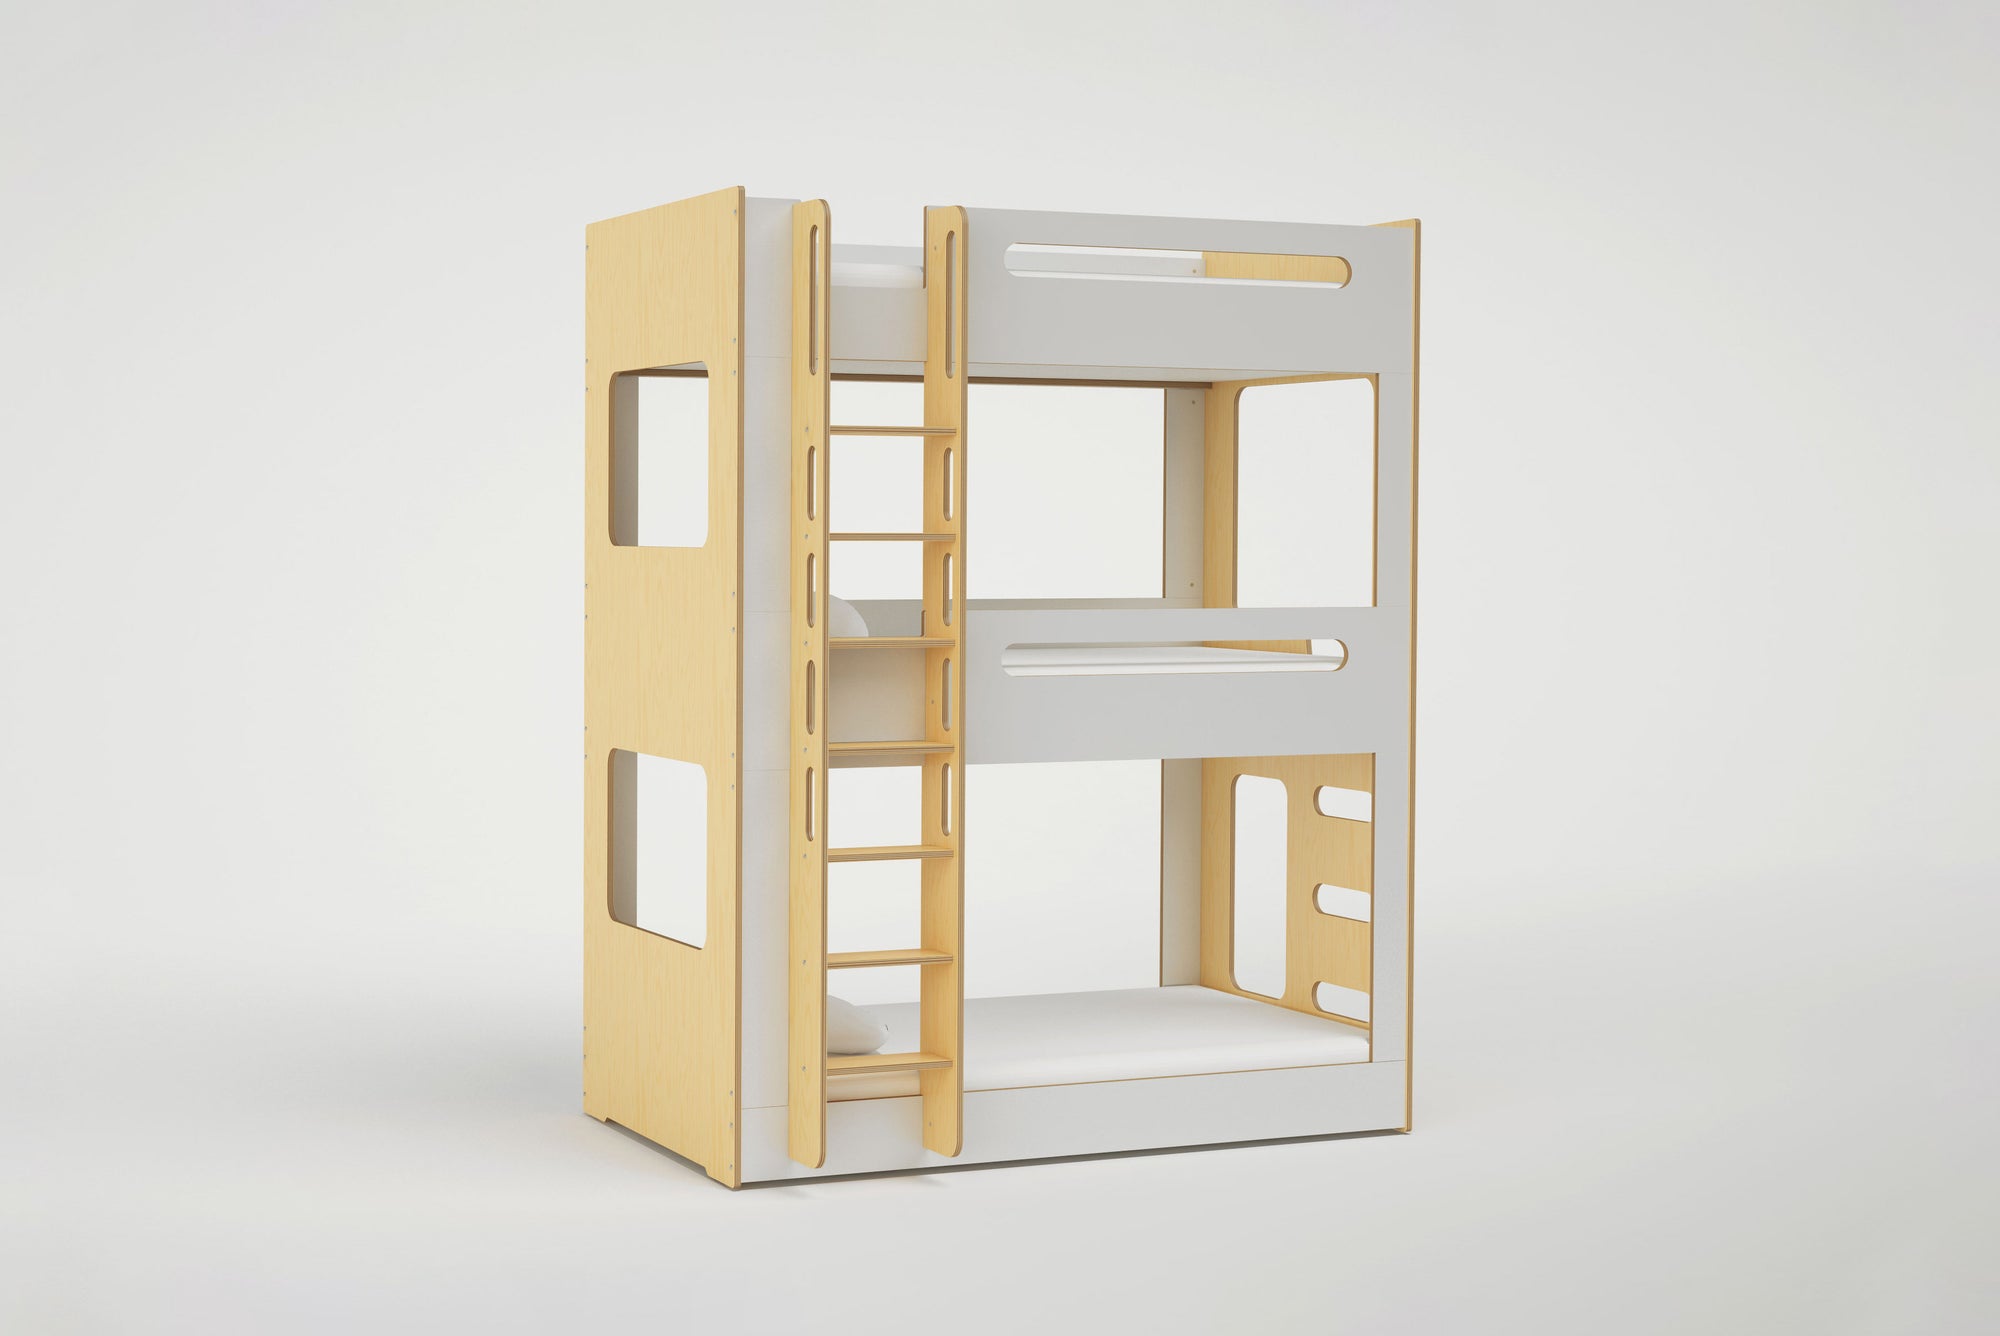 triple bunk beds for kids